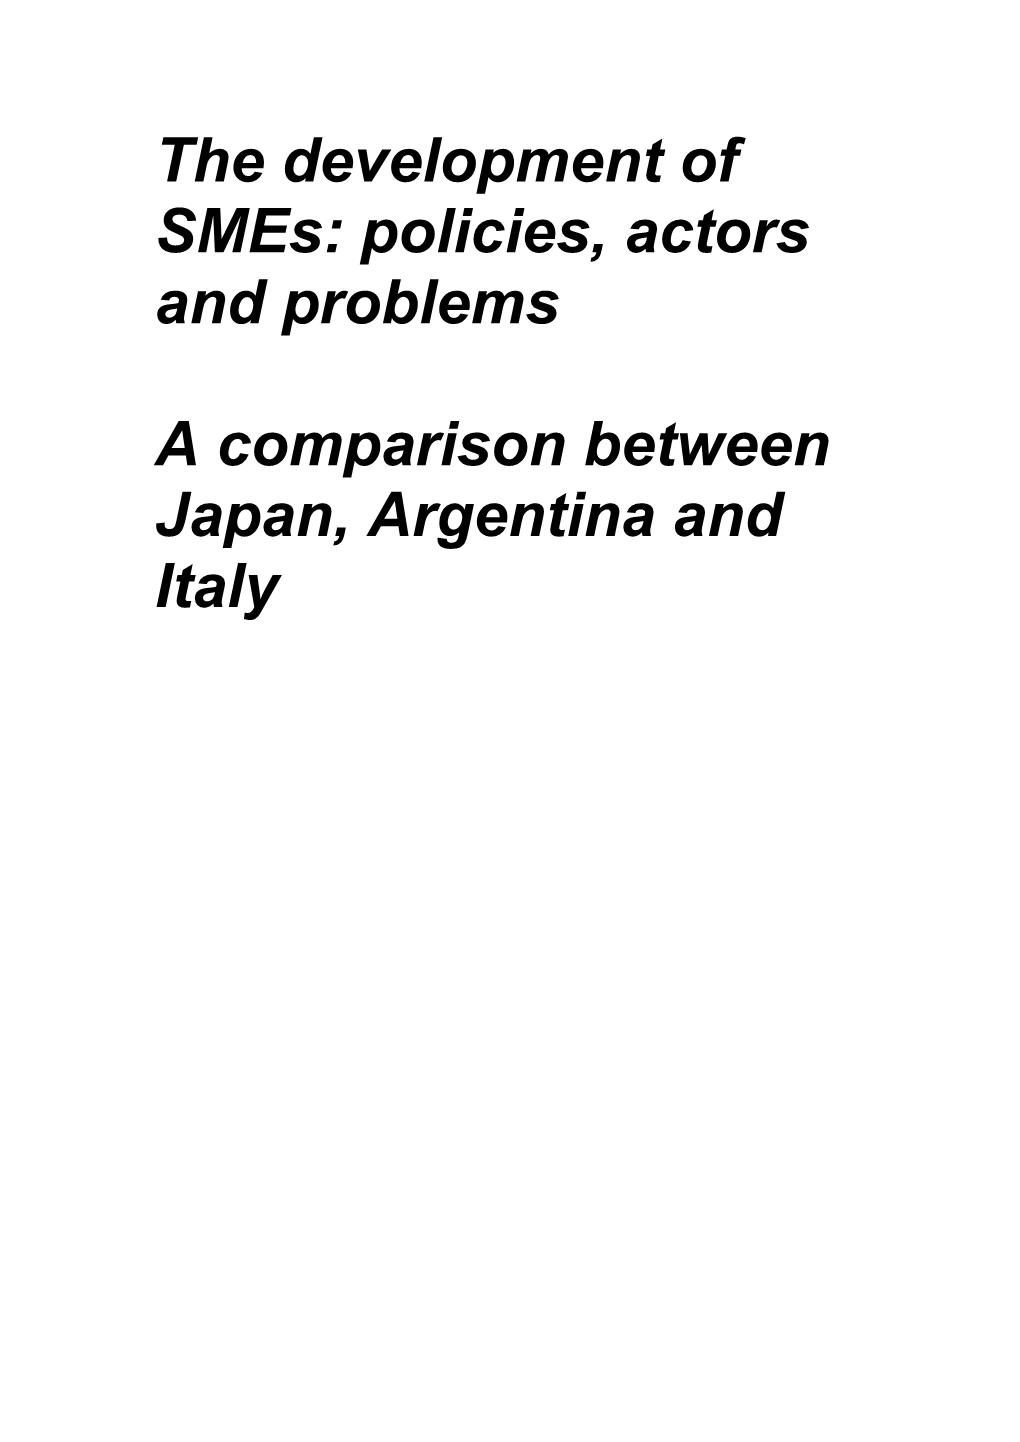 The Development of Smes: Policies, Actors and Problems